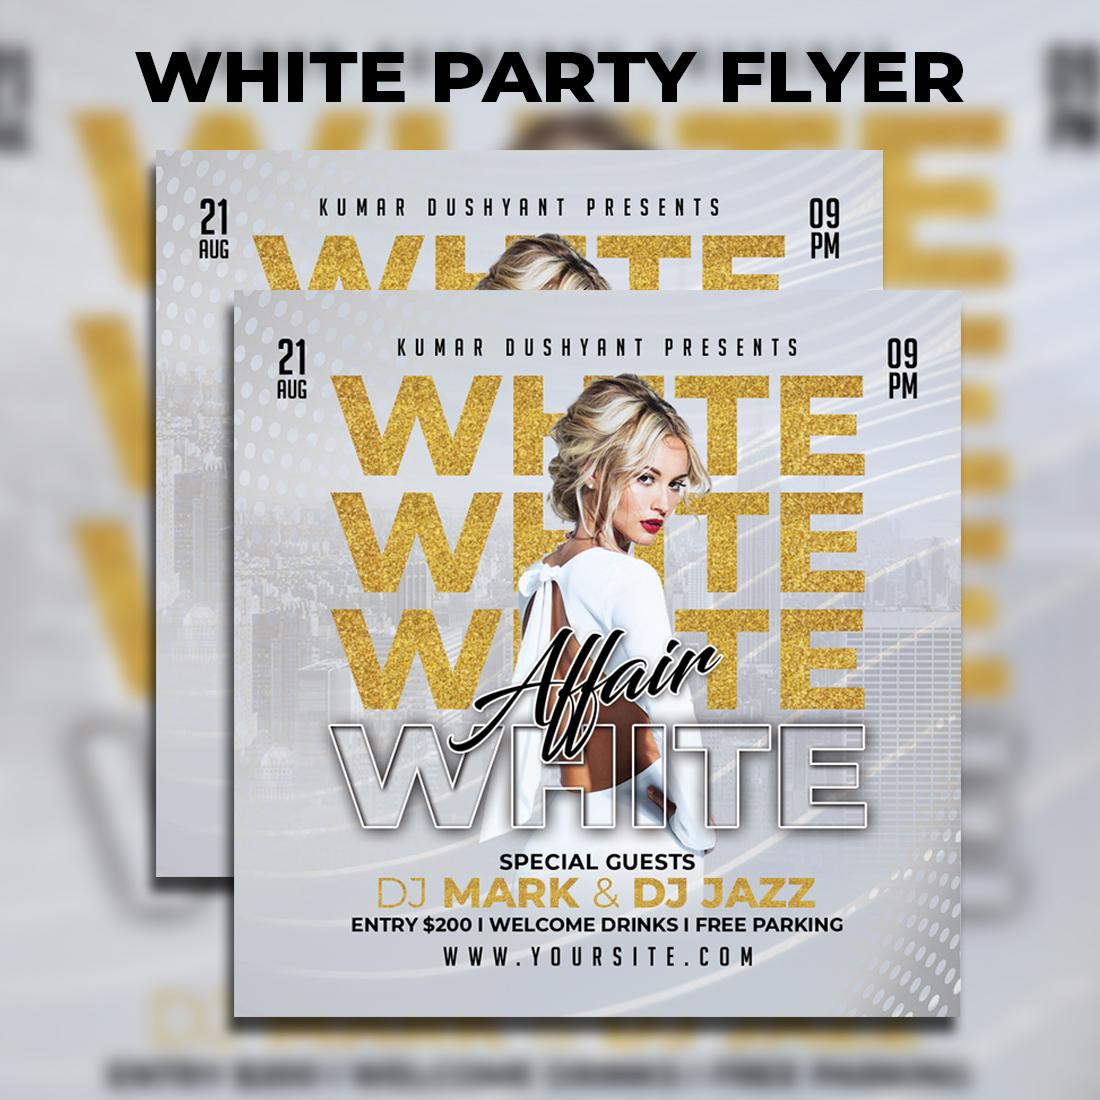 White Party Flyer cover image.